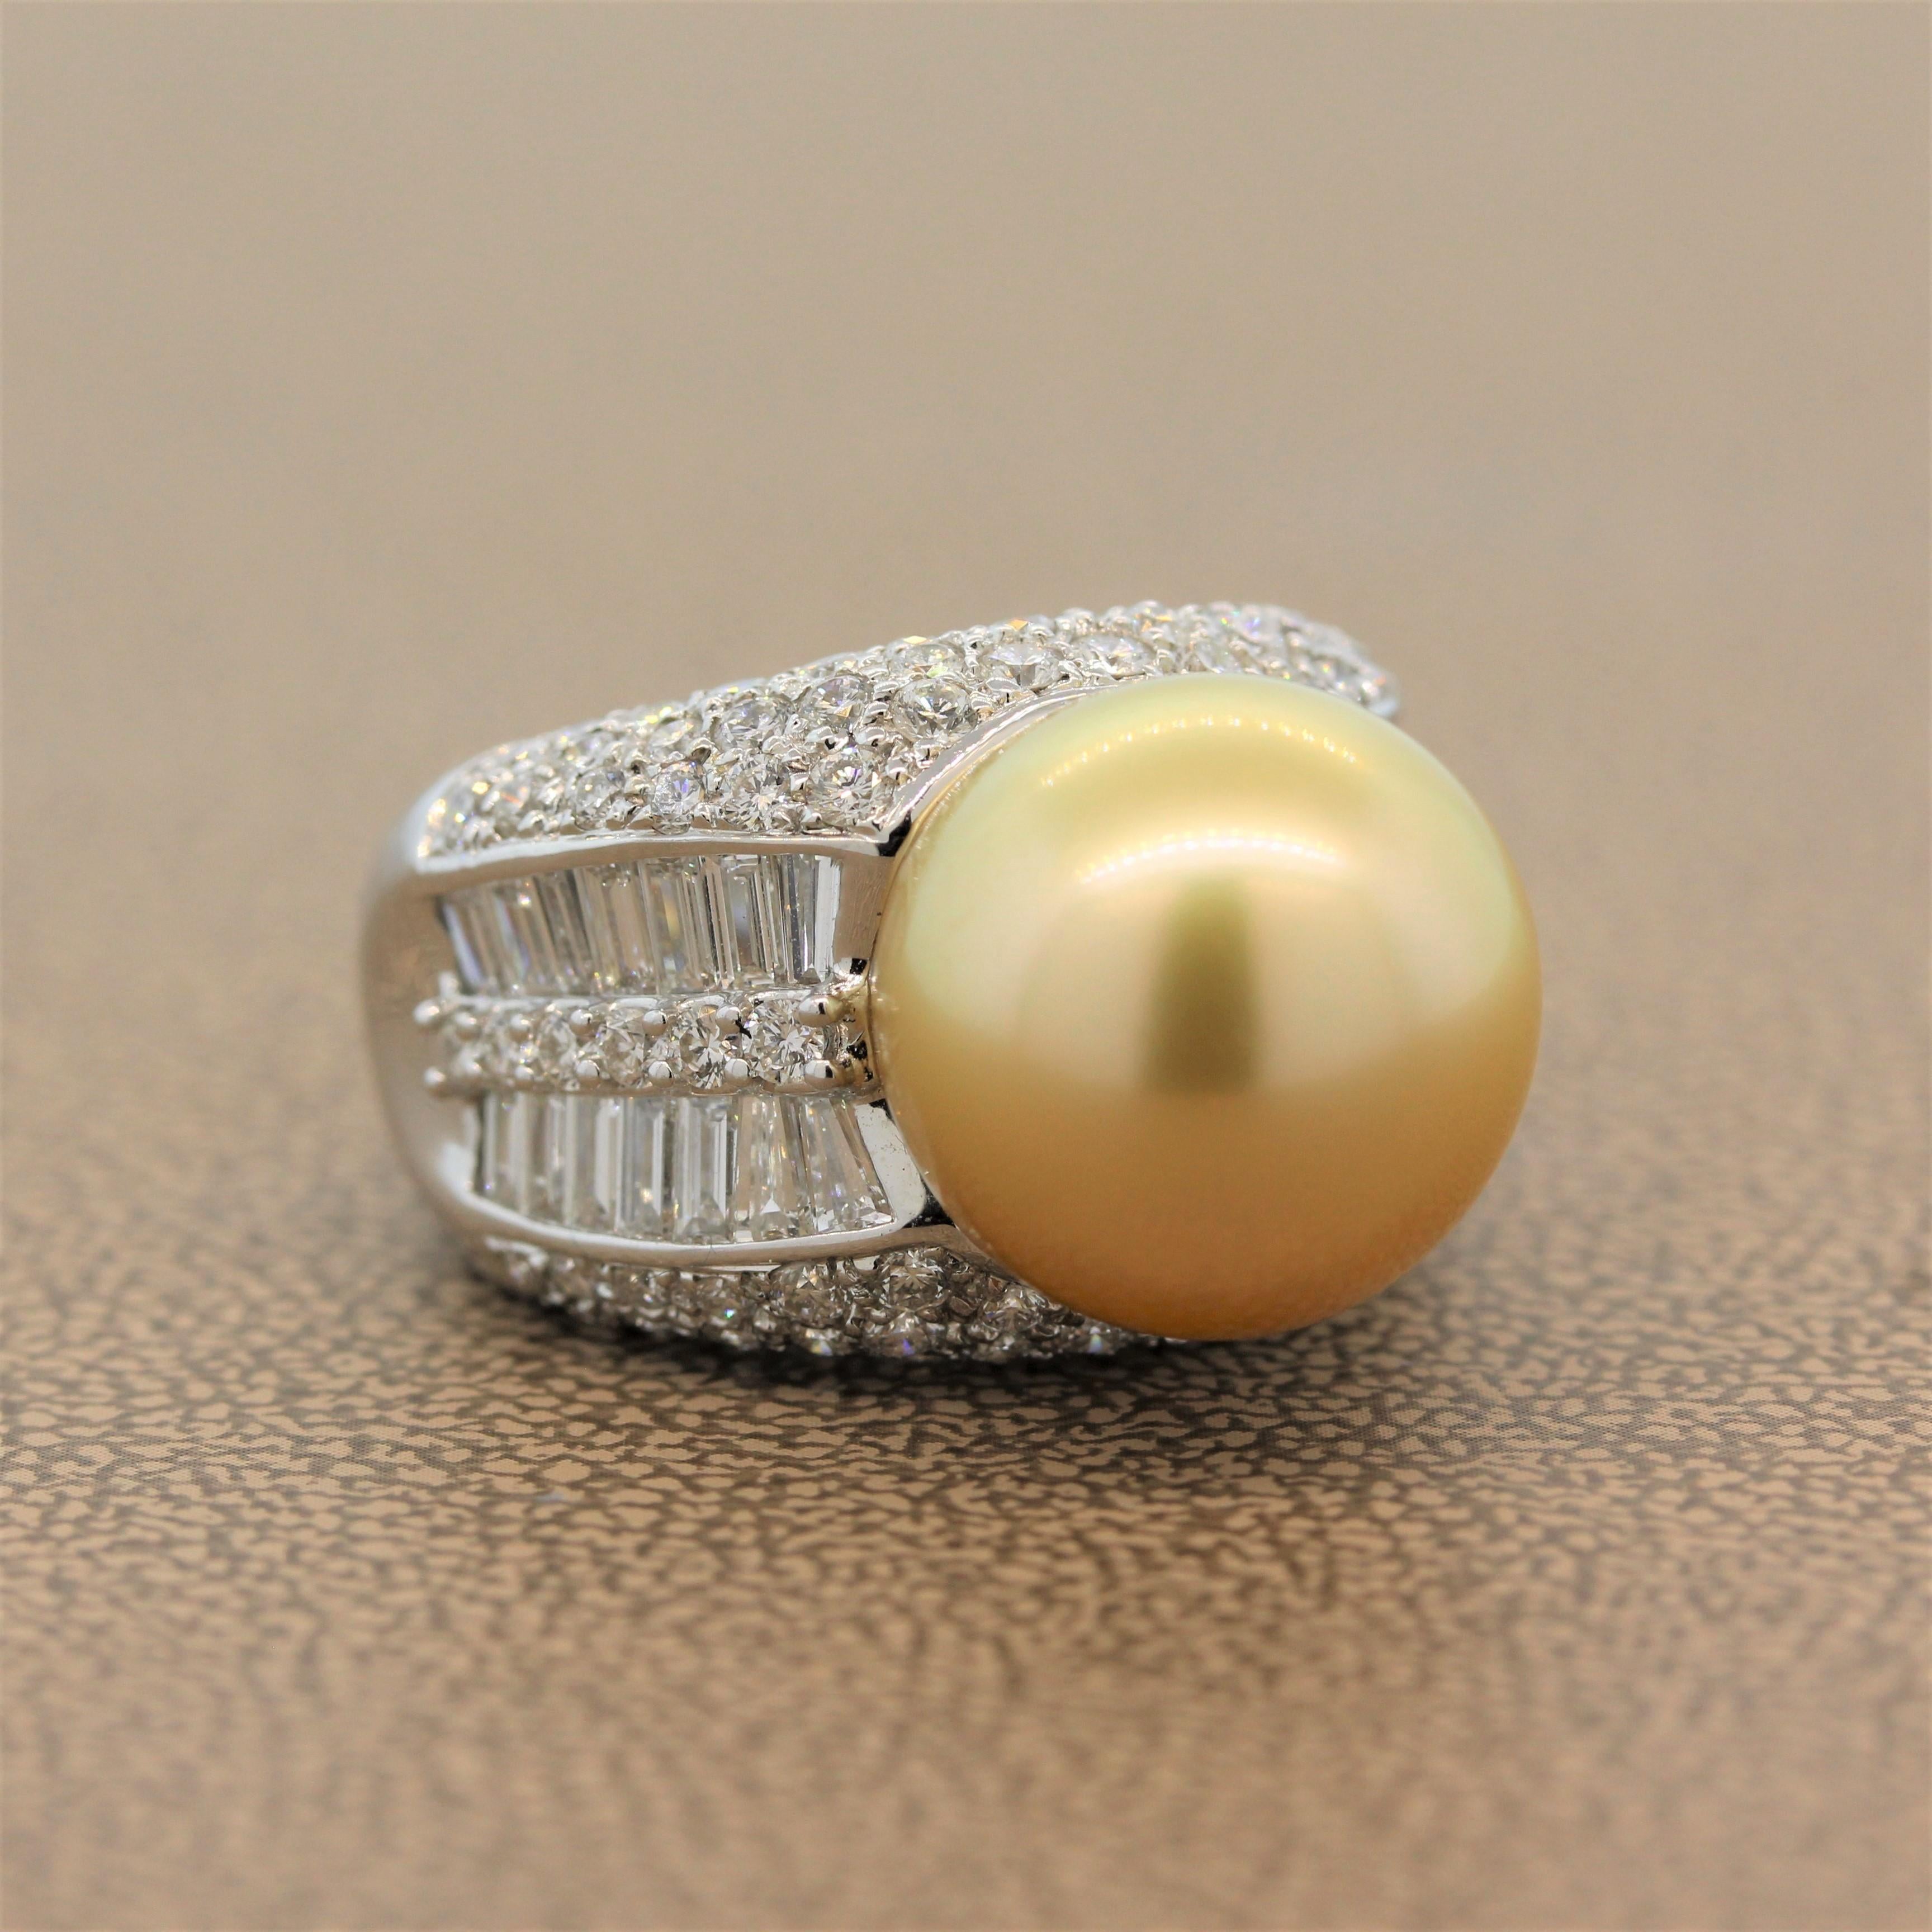 A marvelous ring featuring a 14.5mm golden South Sea Pearl. The sheen of this stunning pearl is a perfect match for the 4.80 carats of round cut and baguette cut diamonds of this 18K white gold ring.

Ring Size 5.5 (Sizable)
